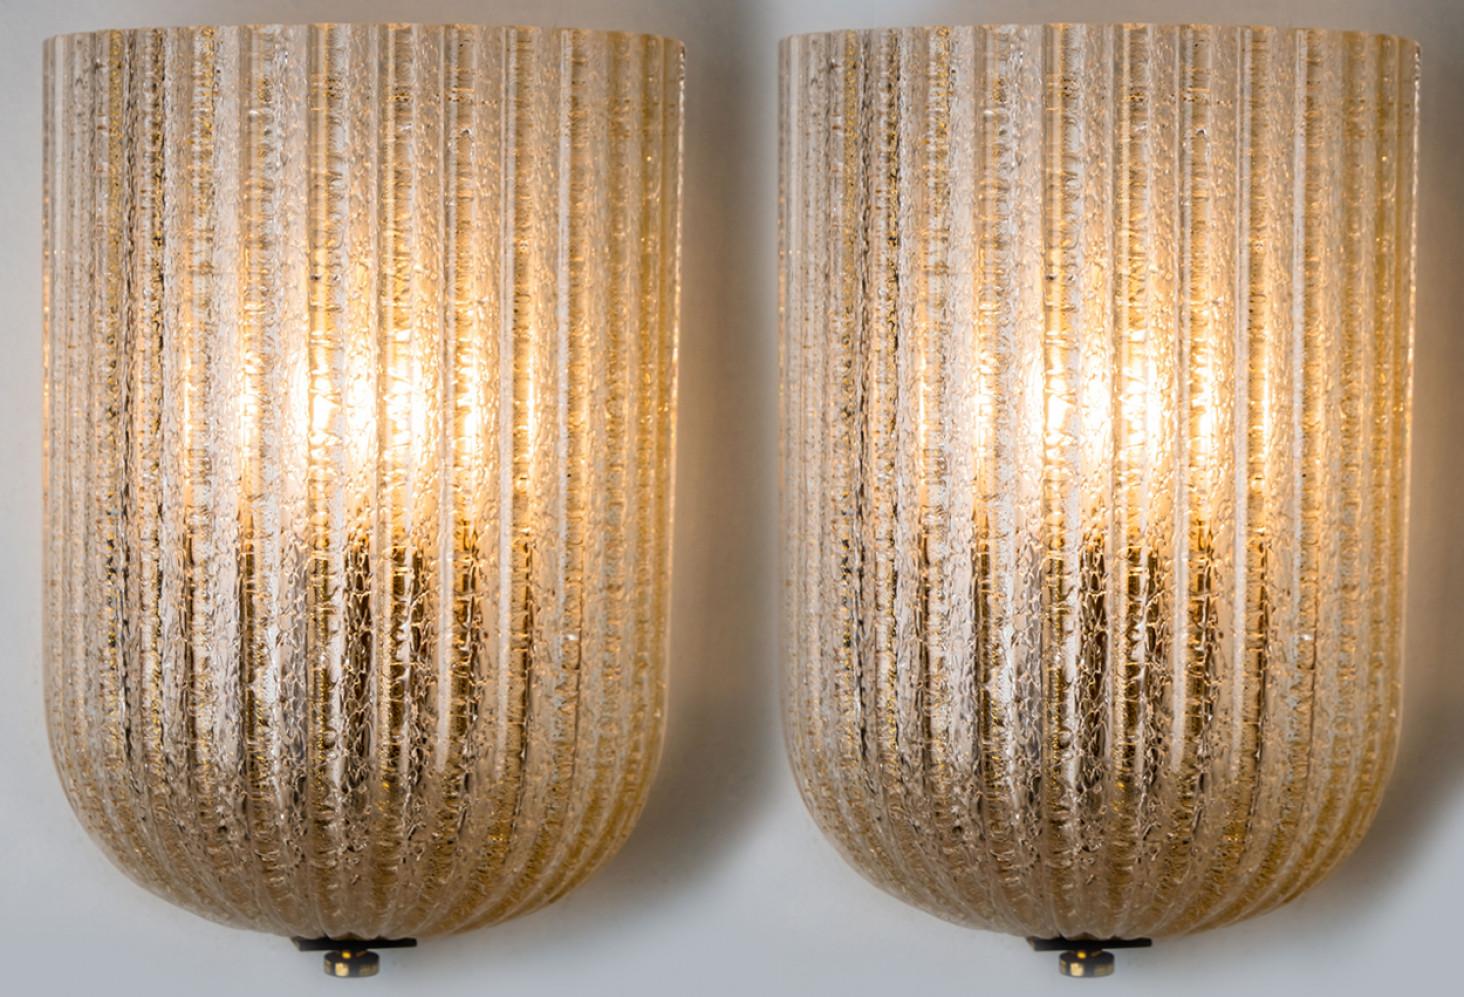 1 of 2 Fluted Murano Glass Wall Sconces Barovier, Italy, 1960s For Sale 6